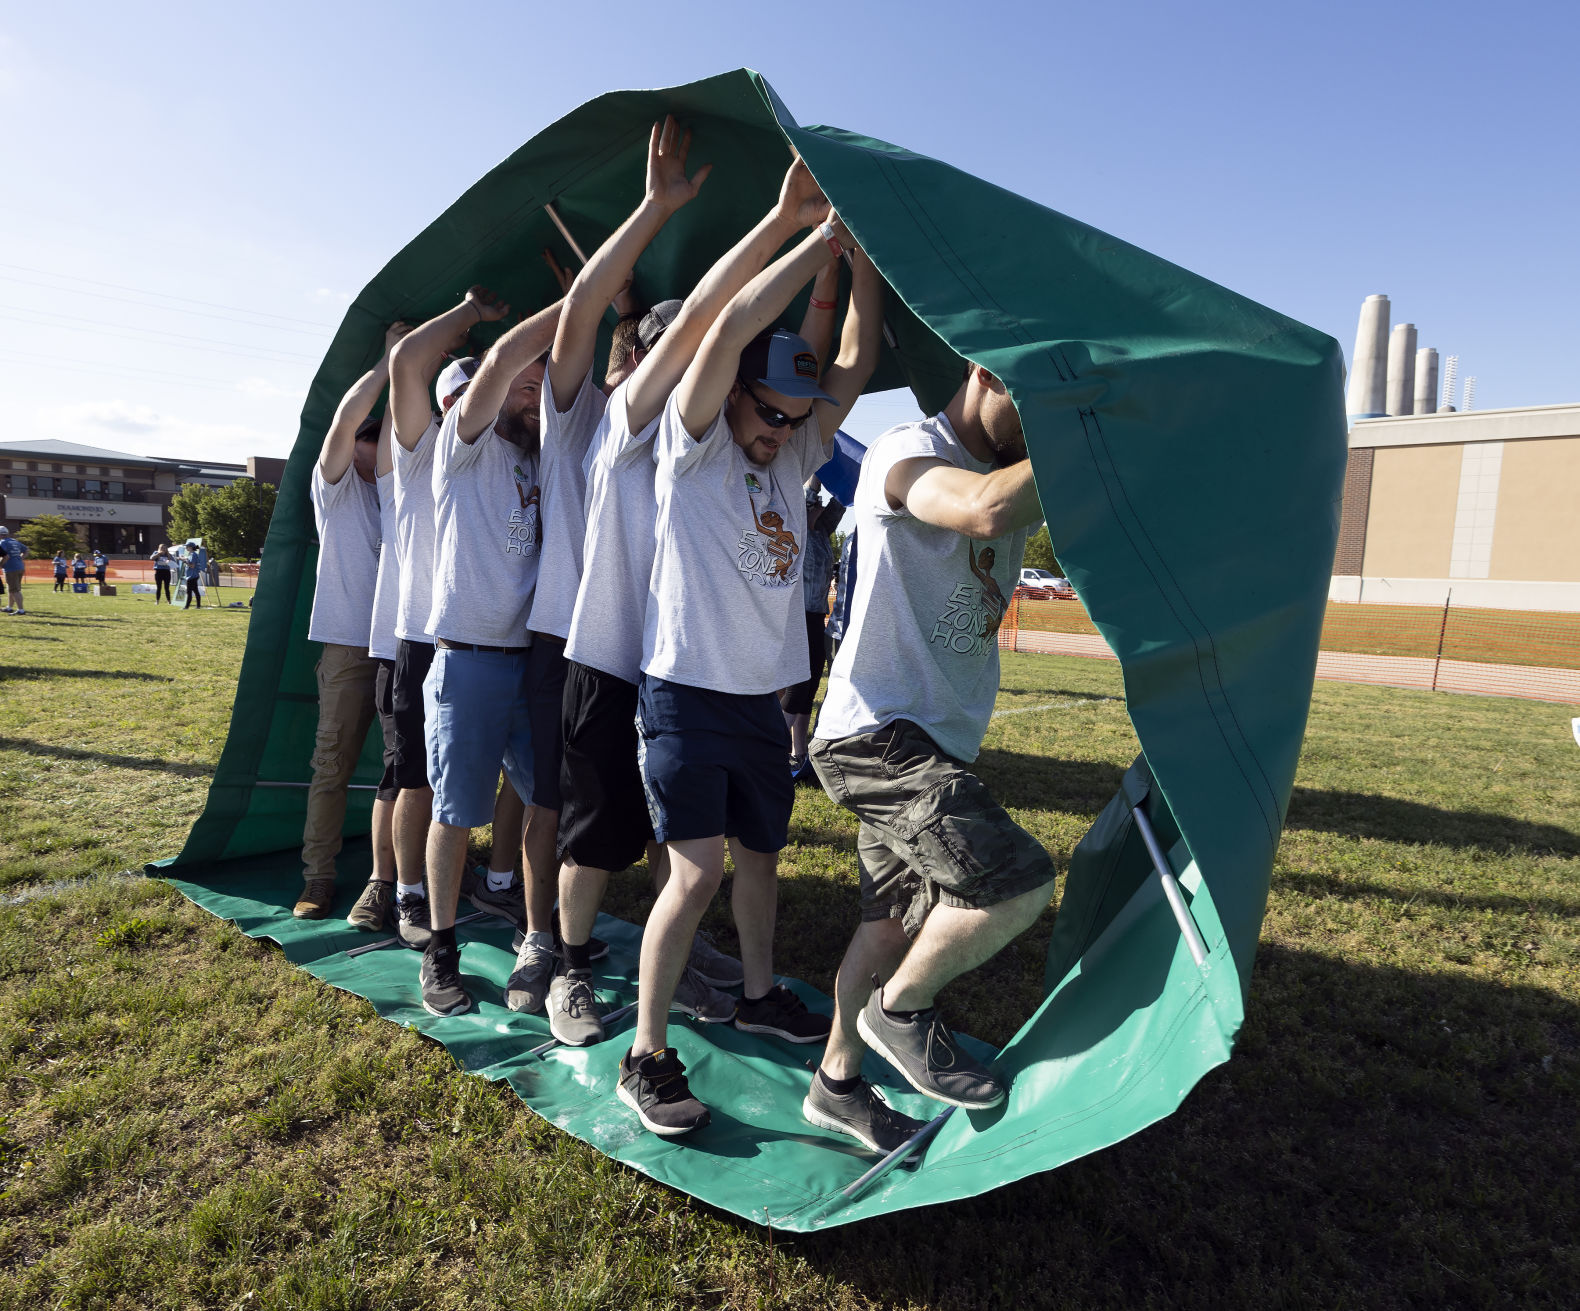 Members of team All Seasons compete in a centipede game at the Area Residential Care Corporate and Community game night at the Port of Dubuque on Friday, June 10, 2022.    PHOTO CREDIT: Stephen Gassman